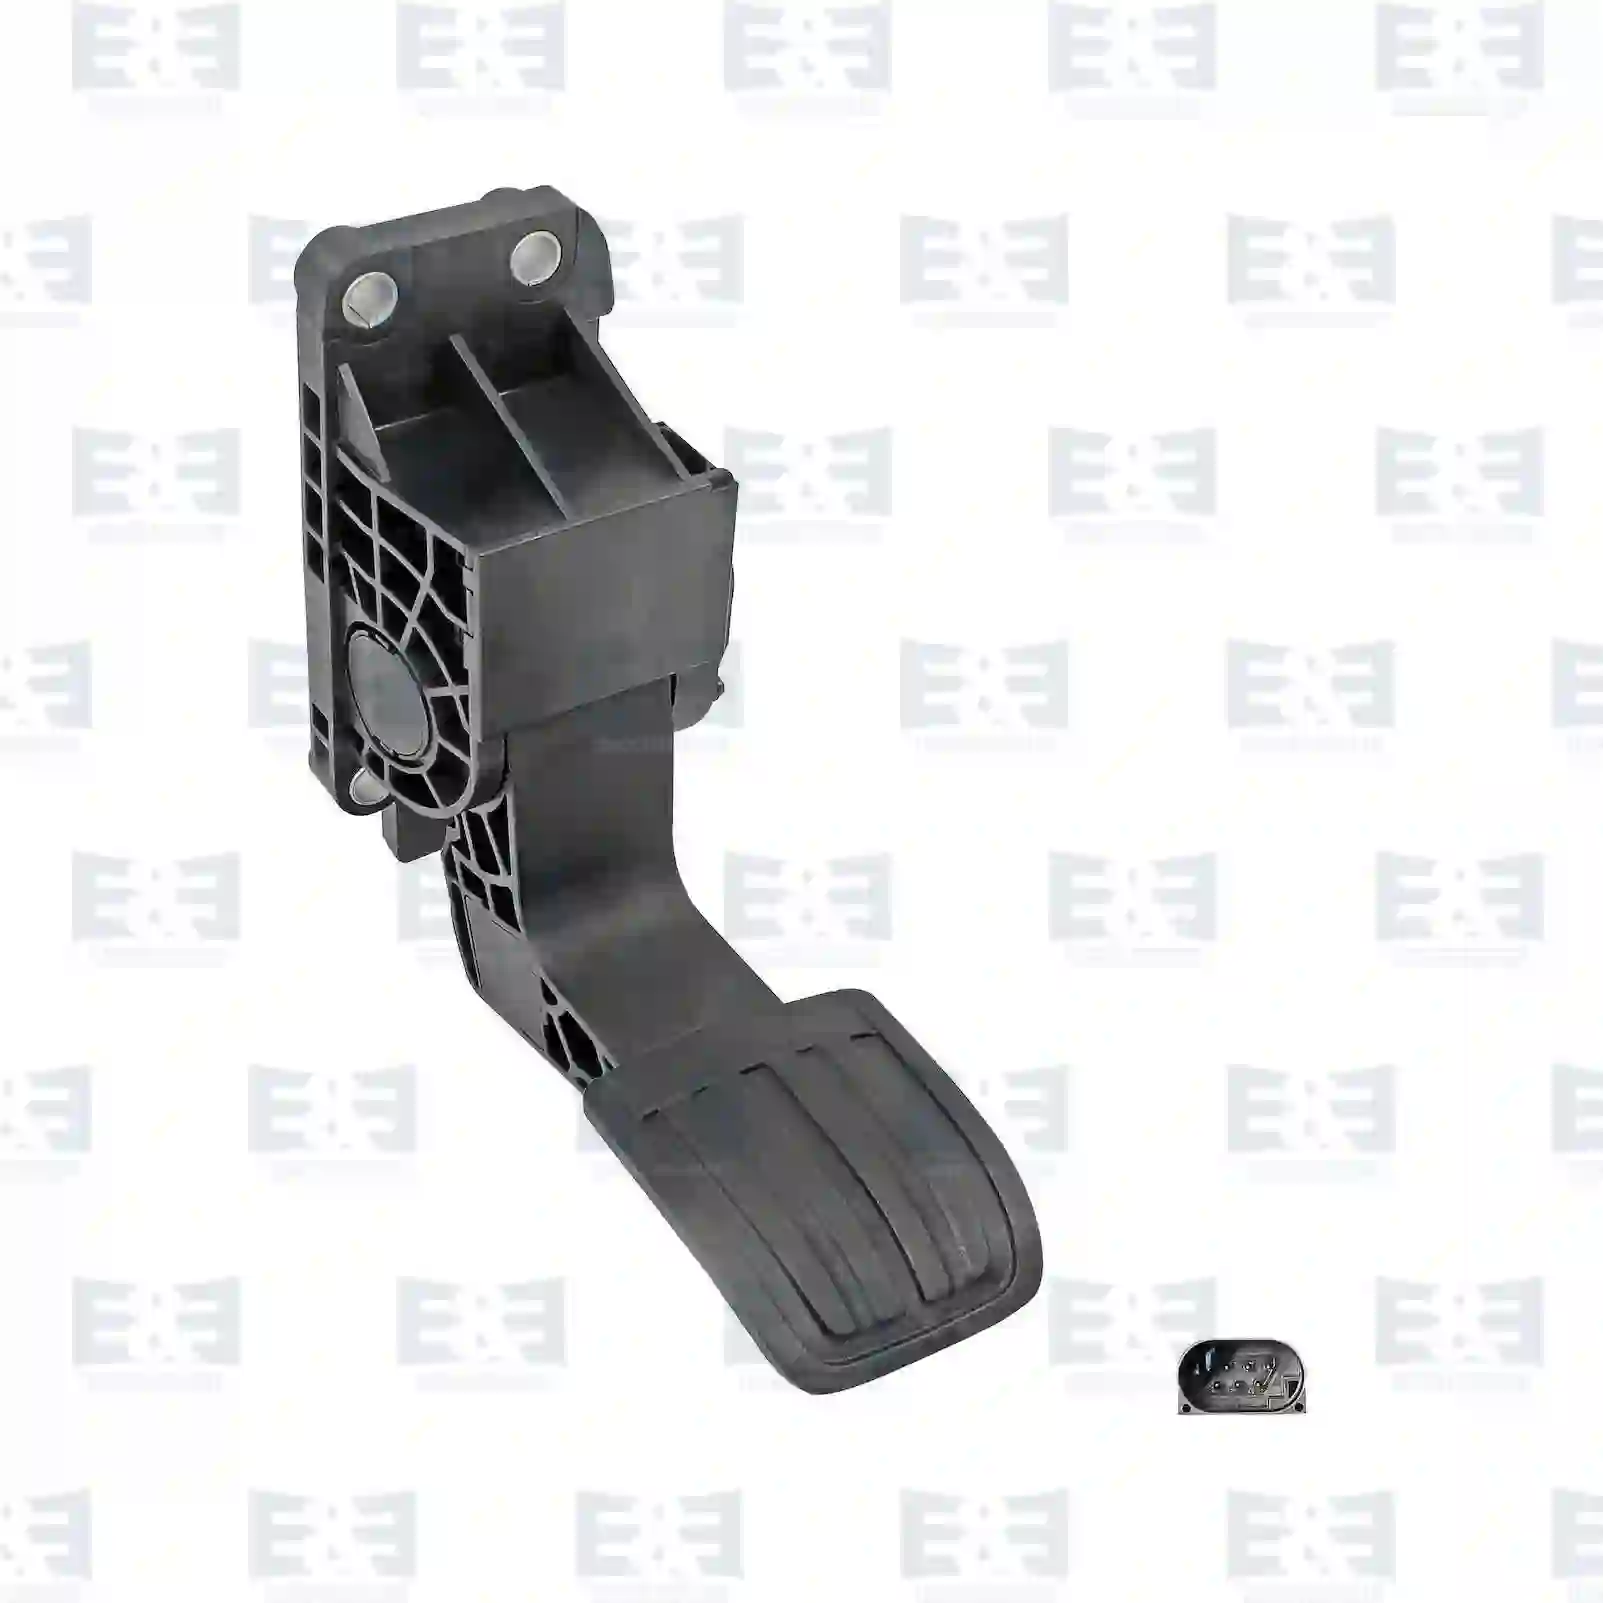 Accelerator pedal, with sensor, without adapter plate, 2E2207000, 1845521 ||  2E2207000 E&E Truck Spare Parts | Truck Spare Parts, Auotomotive Spare Parts Accelerator pedal, with sensor, without adapter plate, 2E2207000, 1845521 ||  2E2207000 E&E Truck Spare Parts | Truck Spare Parts, Auotomotive Spare Parts